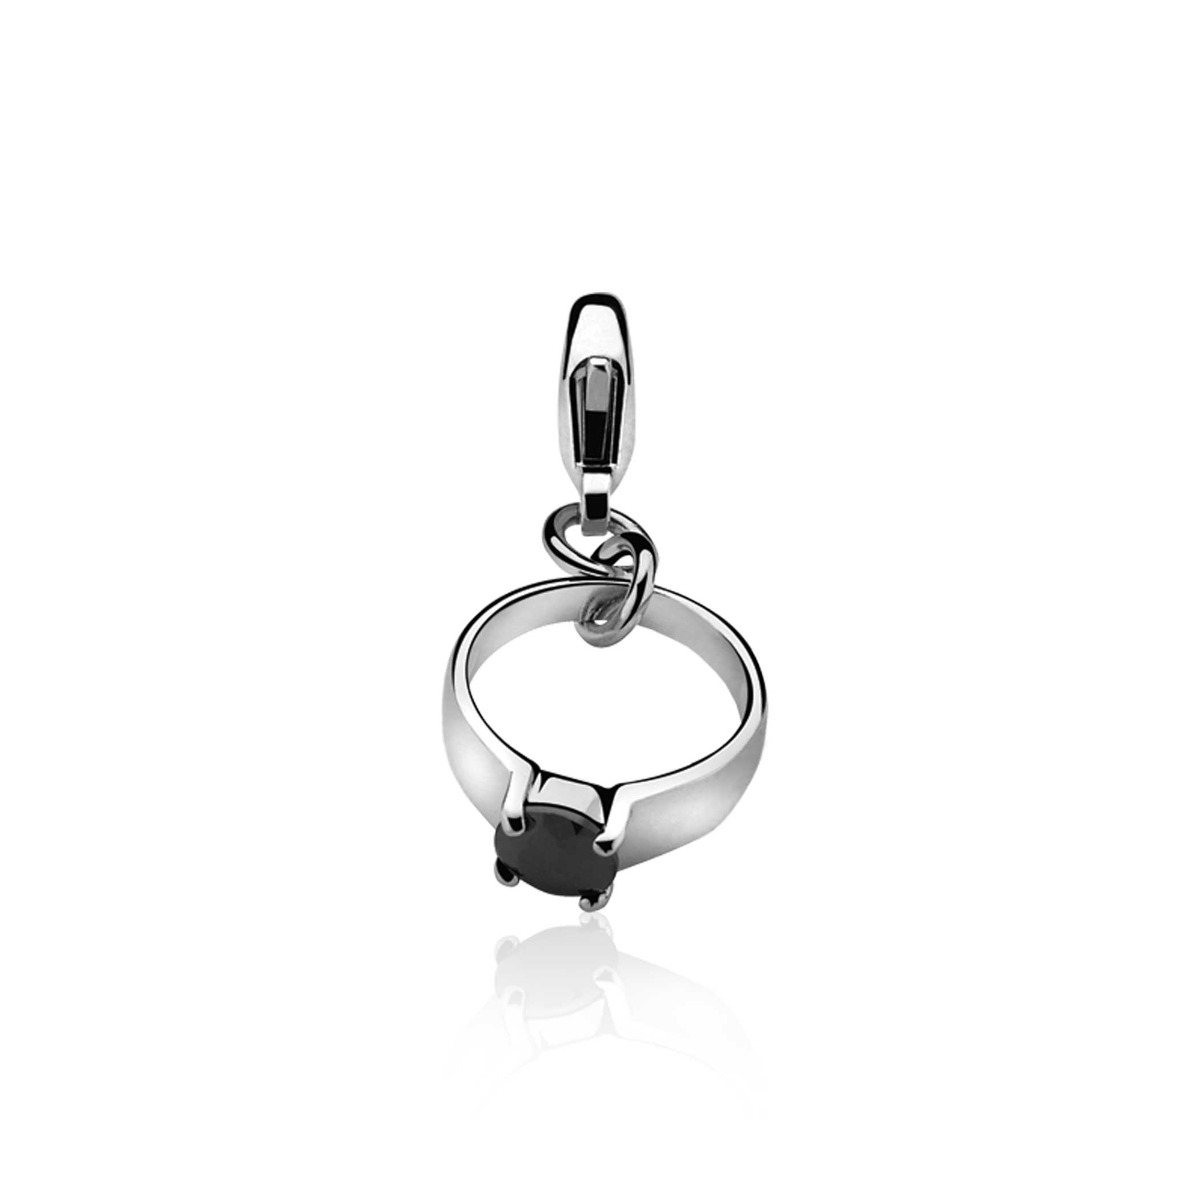 ZINZI Sterling Silver Charm Ring Black CHARMS61Z